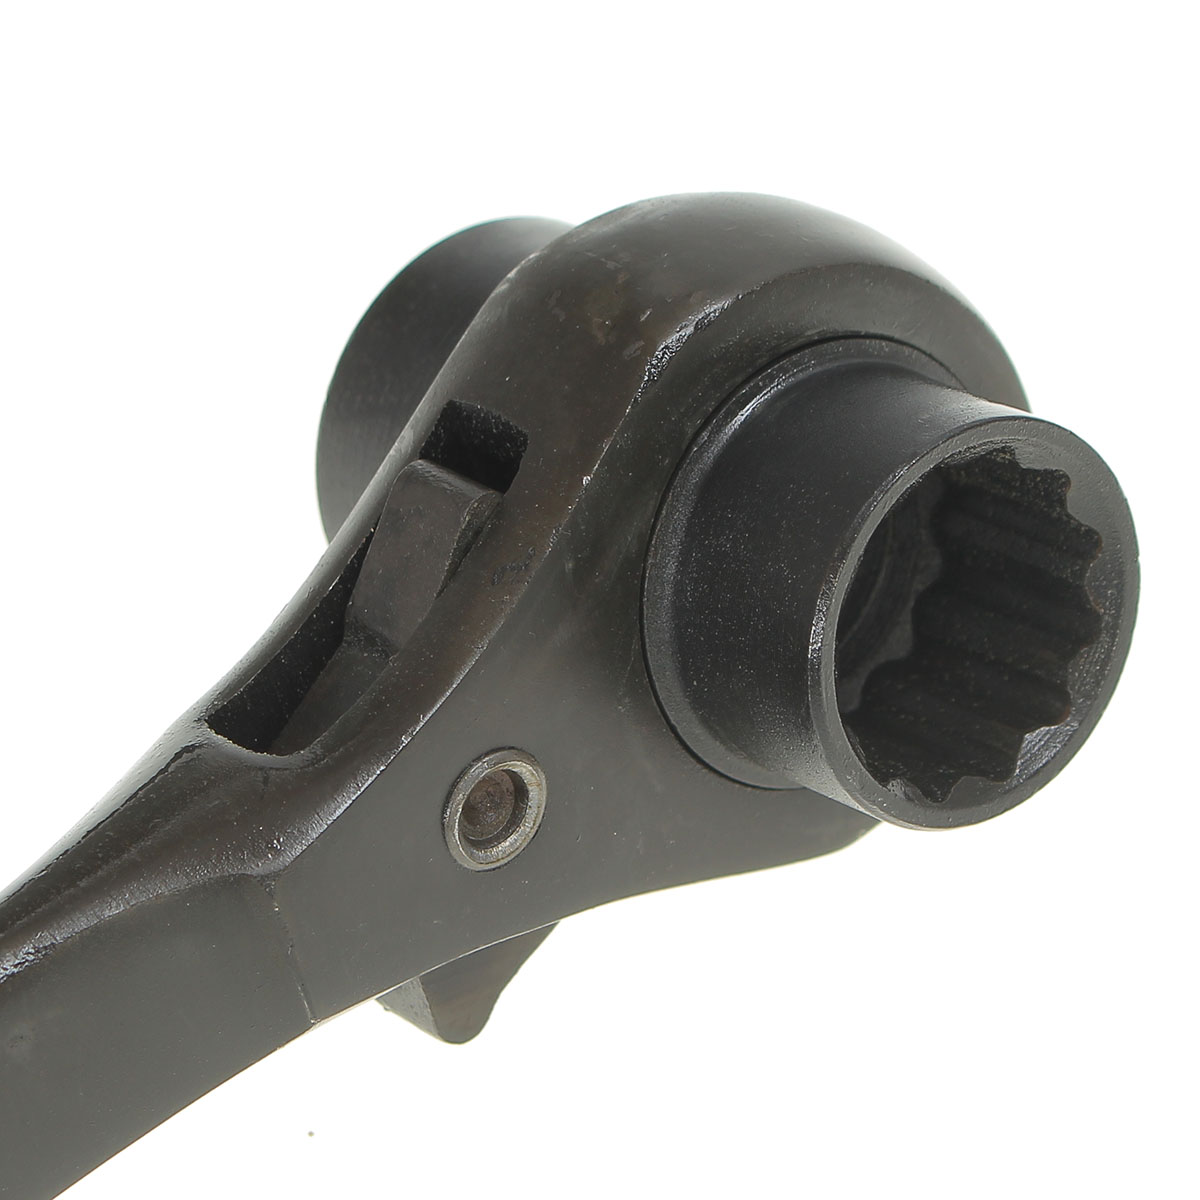 19x21mm-Steel-Handle-2-Way-Scaffolders-End-Tapered-Ratchet-Socket-Spanner-Wrench-1050464